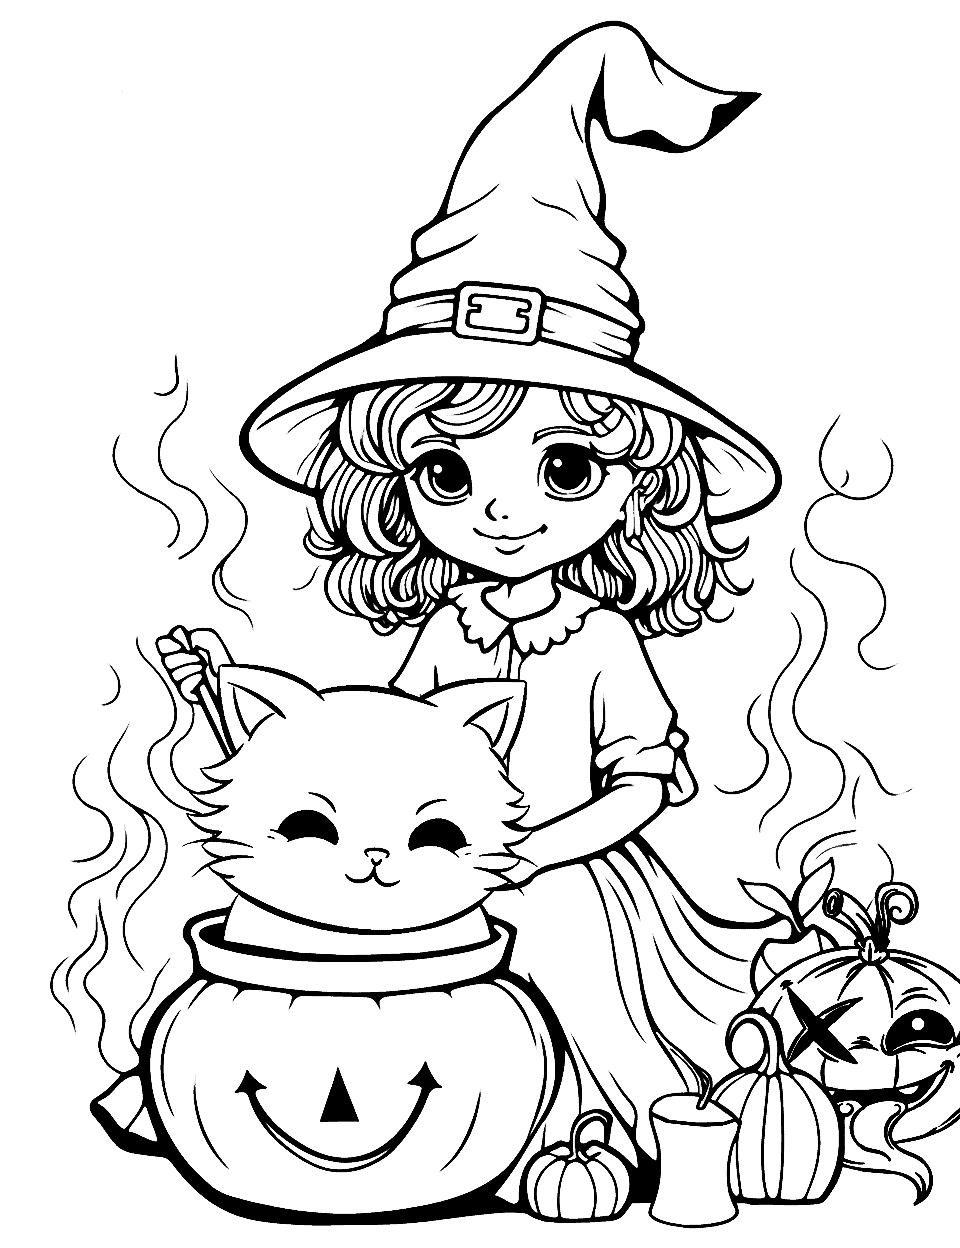 Cute Witch and Her Cat Coloring Page - A young, adorable witch and her cat in the cauldron.